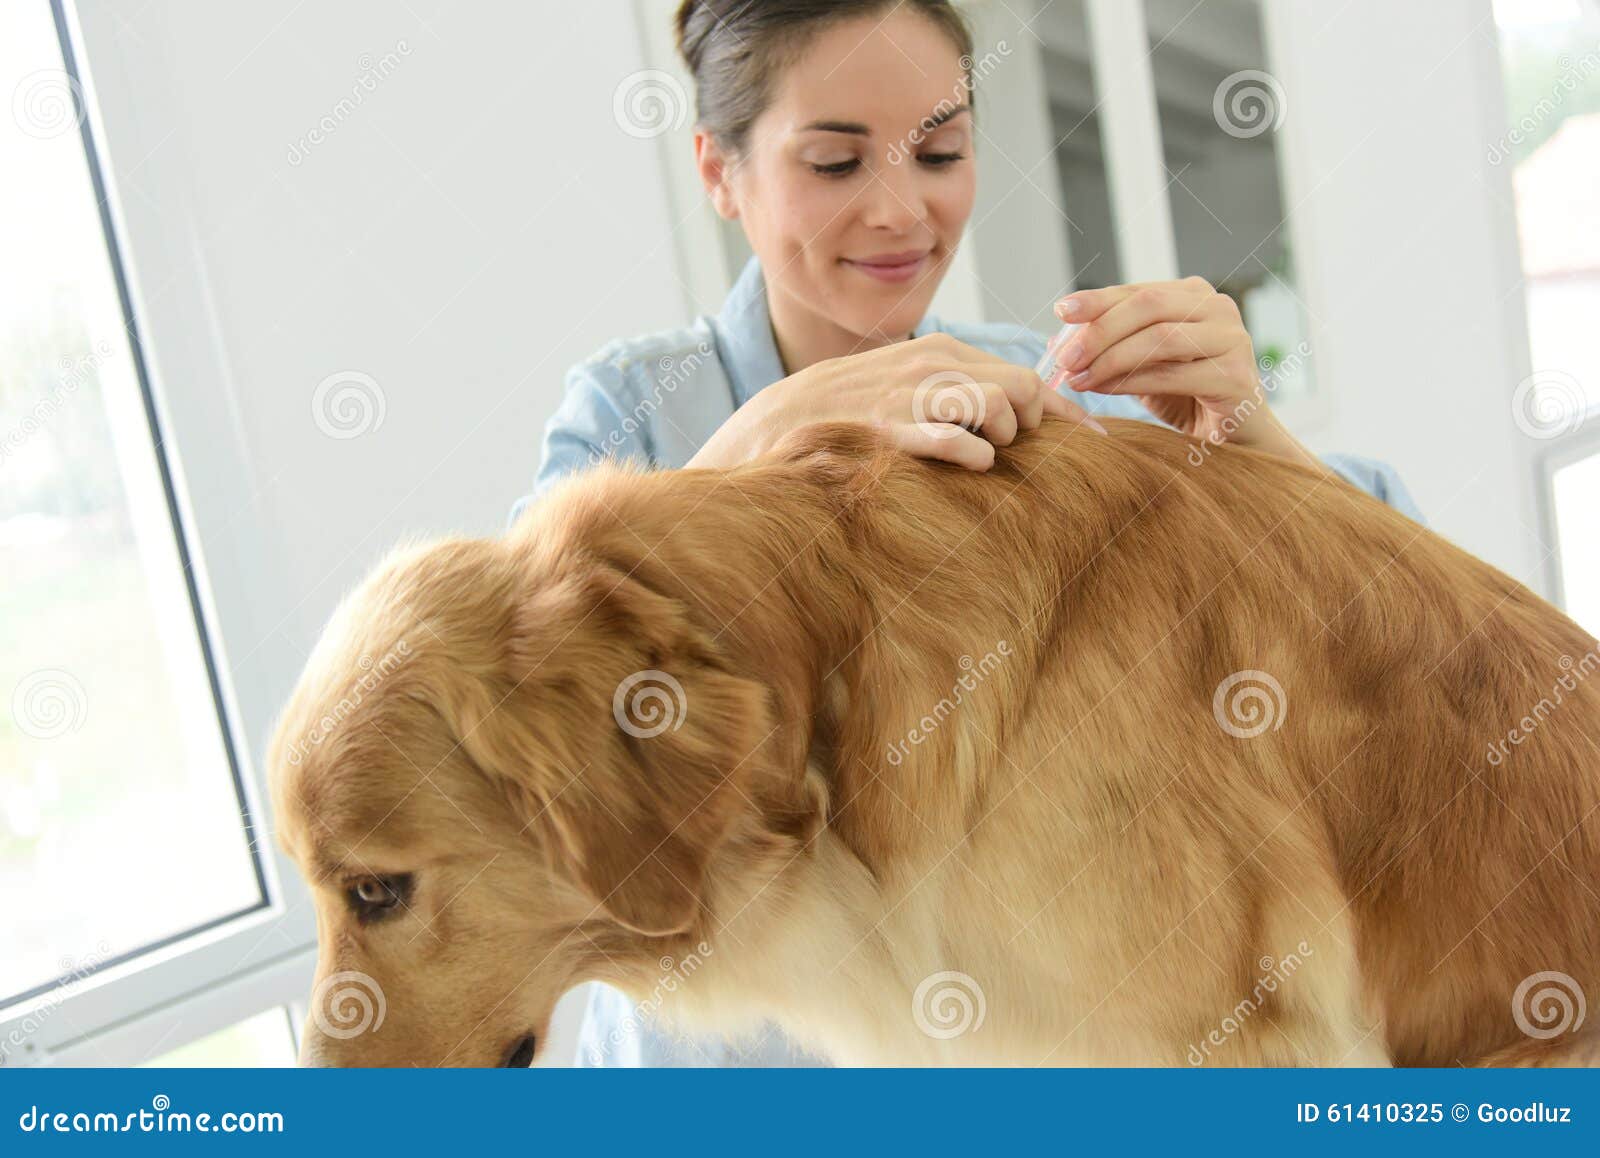 woman applying tick prevention to her dog